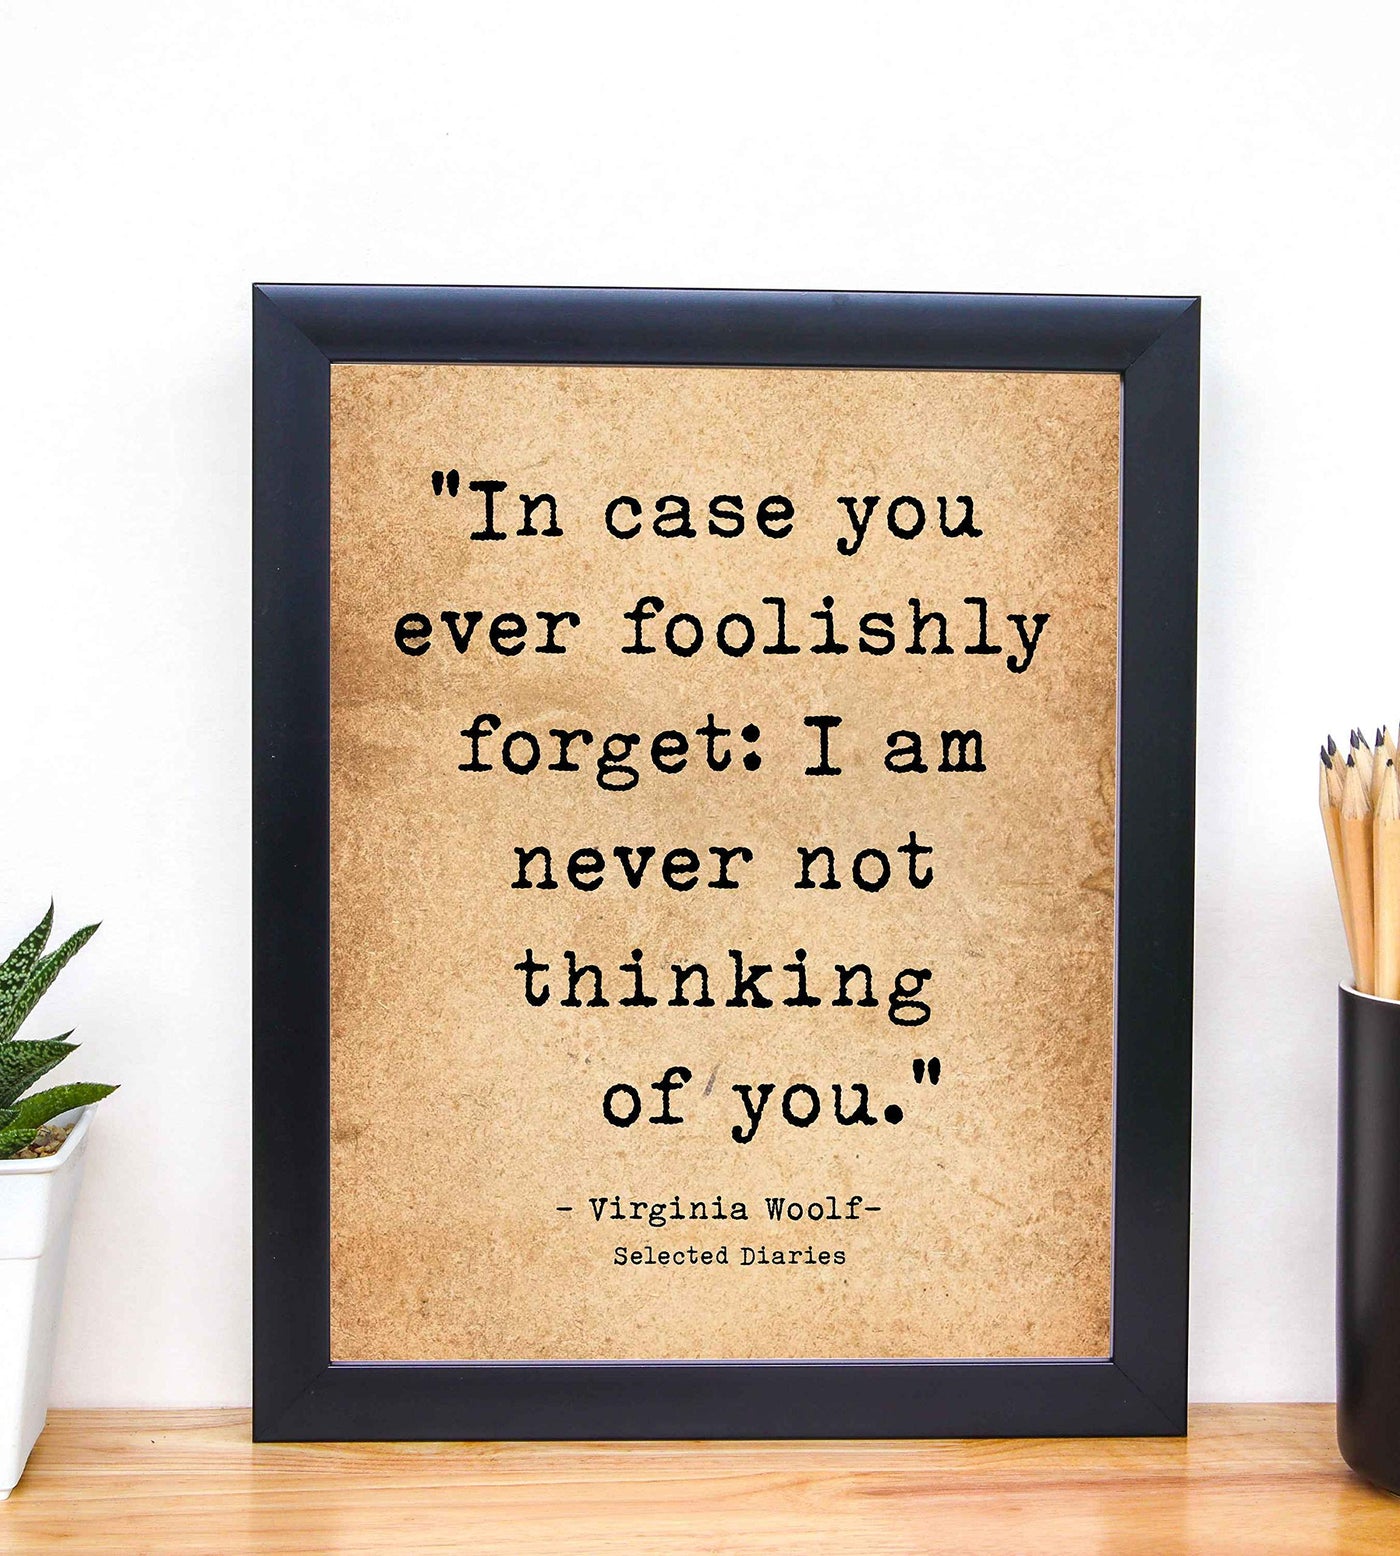 In Case You Ever Foolishly Forget-Virginia Woolf Quotes- 8 x 10" Vintage Romantic Wall Art-Ready to Frame. Love Quotes Poster Print for Home-Bedroom-Office-Dorm Decor. Great Inspirational Gift!